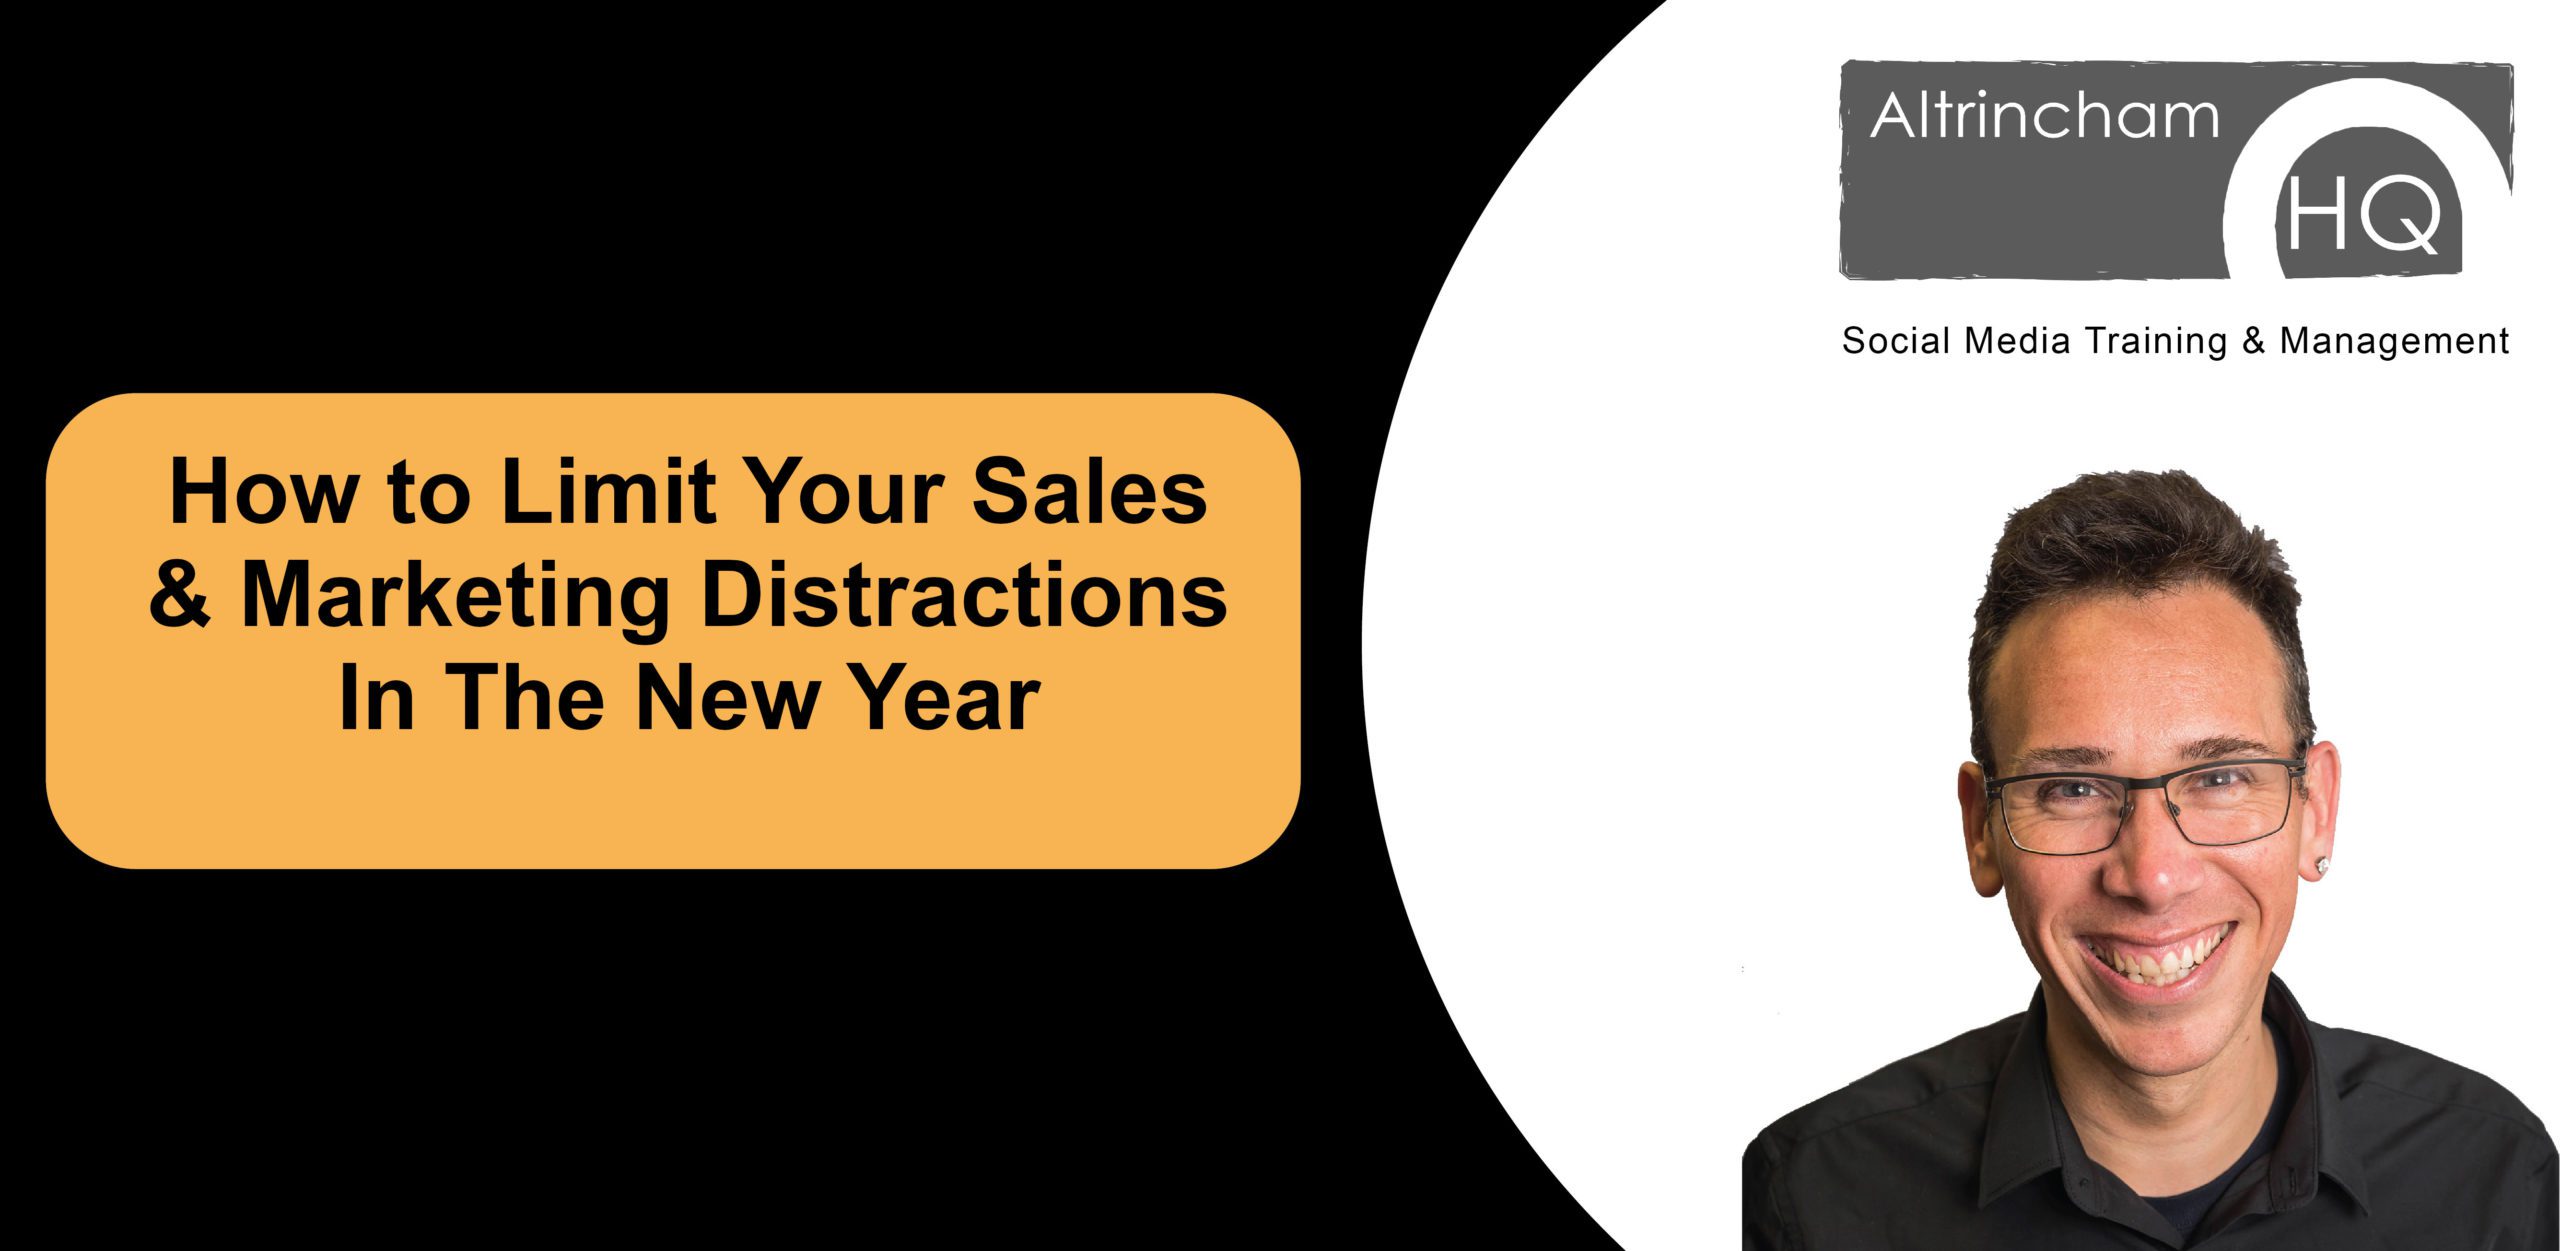 How to Limit Your Sales & Marketing Distractions In The New Year